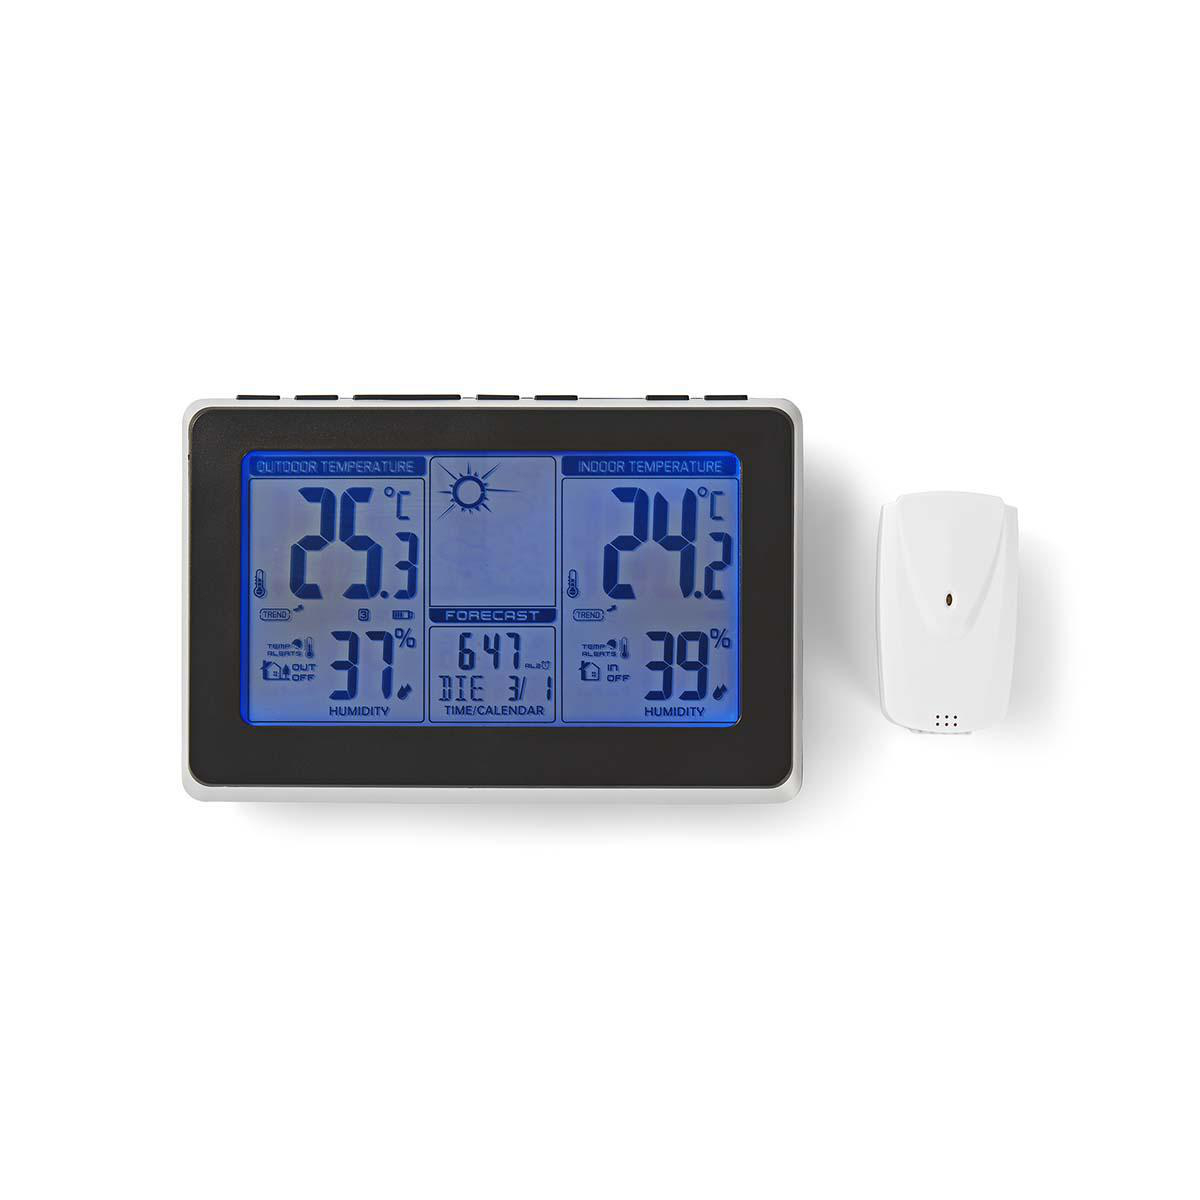 Green Blue GB542 Wireless Weather Station Digital Alarm Clock with Indoor Outdoor Sensor Easy-to-Read Display Temperature /& Humidity